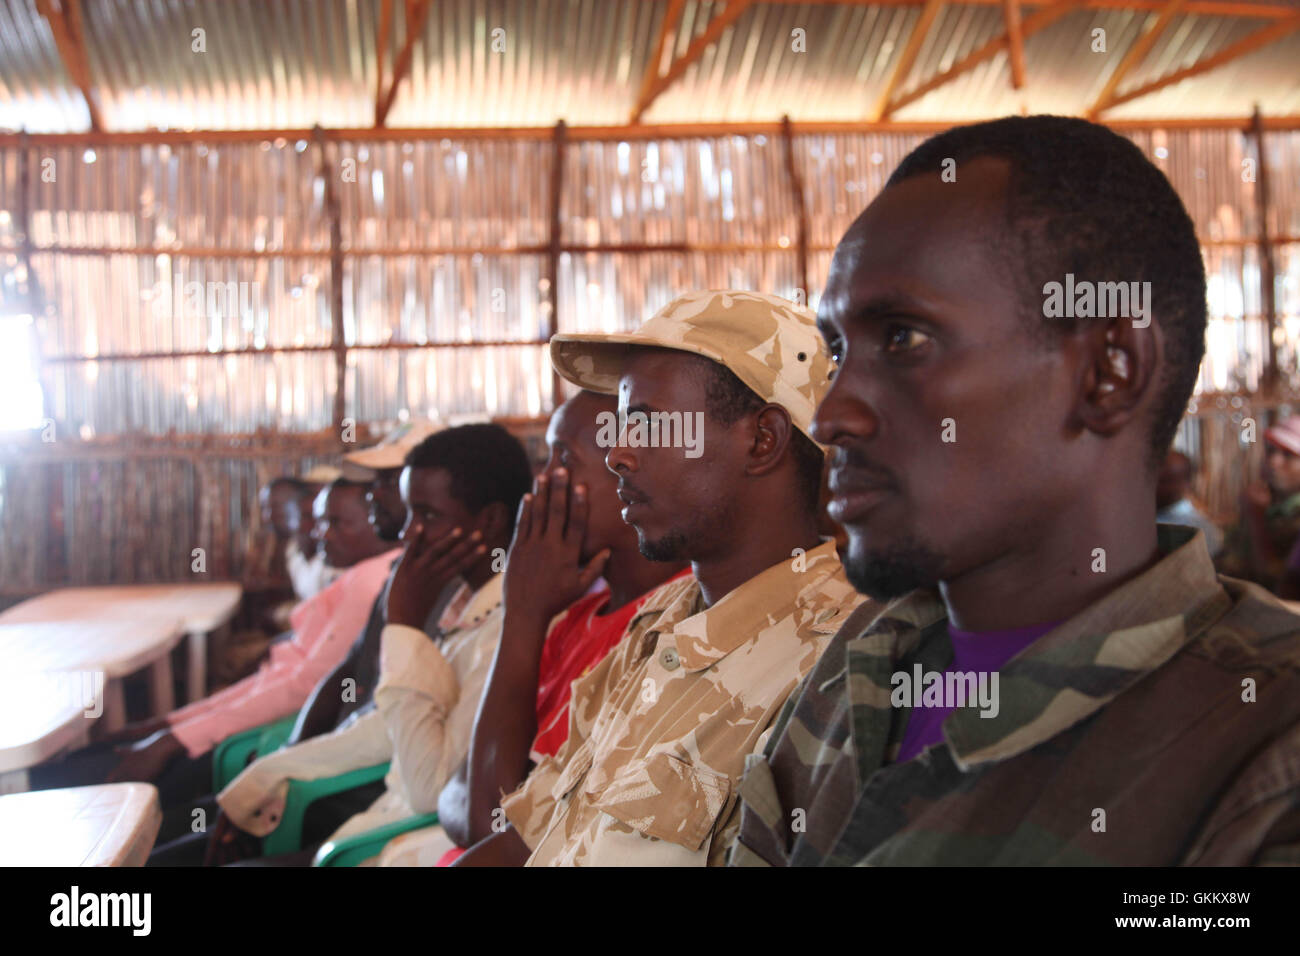 Police recruits for the Interim Jubbaland Administration (IJA) wait for registration before commencing training in Kismayo, Somalia on July 07, 2016. The training is conducted by the African Union Mission in Somalia. AMISOM Photo/ Awil Abukar Stock Photo